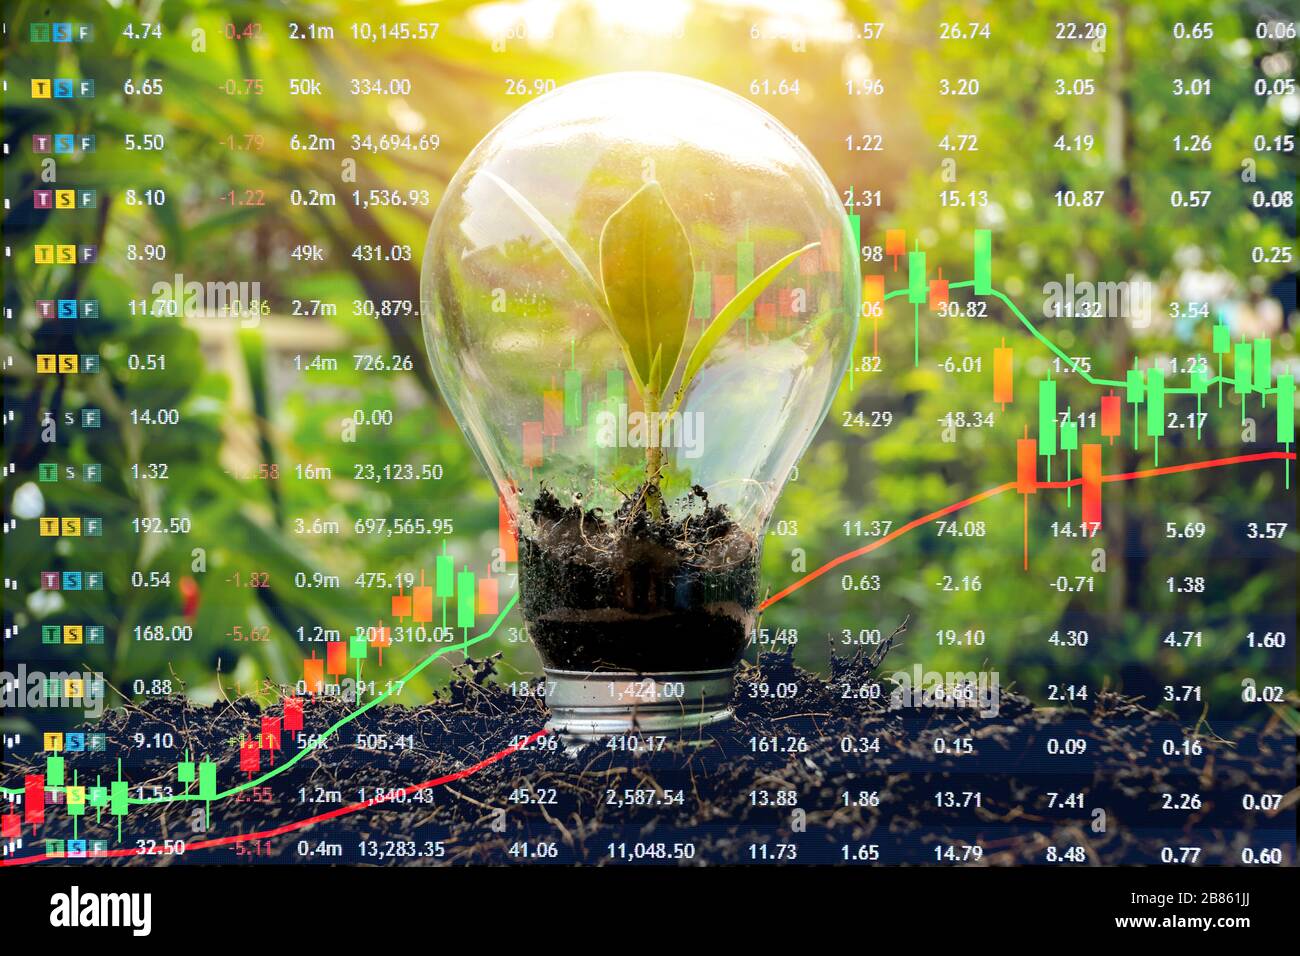 Stock market investment concept gain and profits with candlestick charts and numbers. Trees growing in bulbs Stock Photo